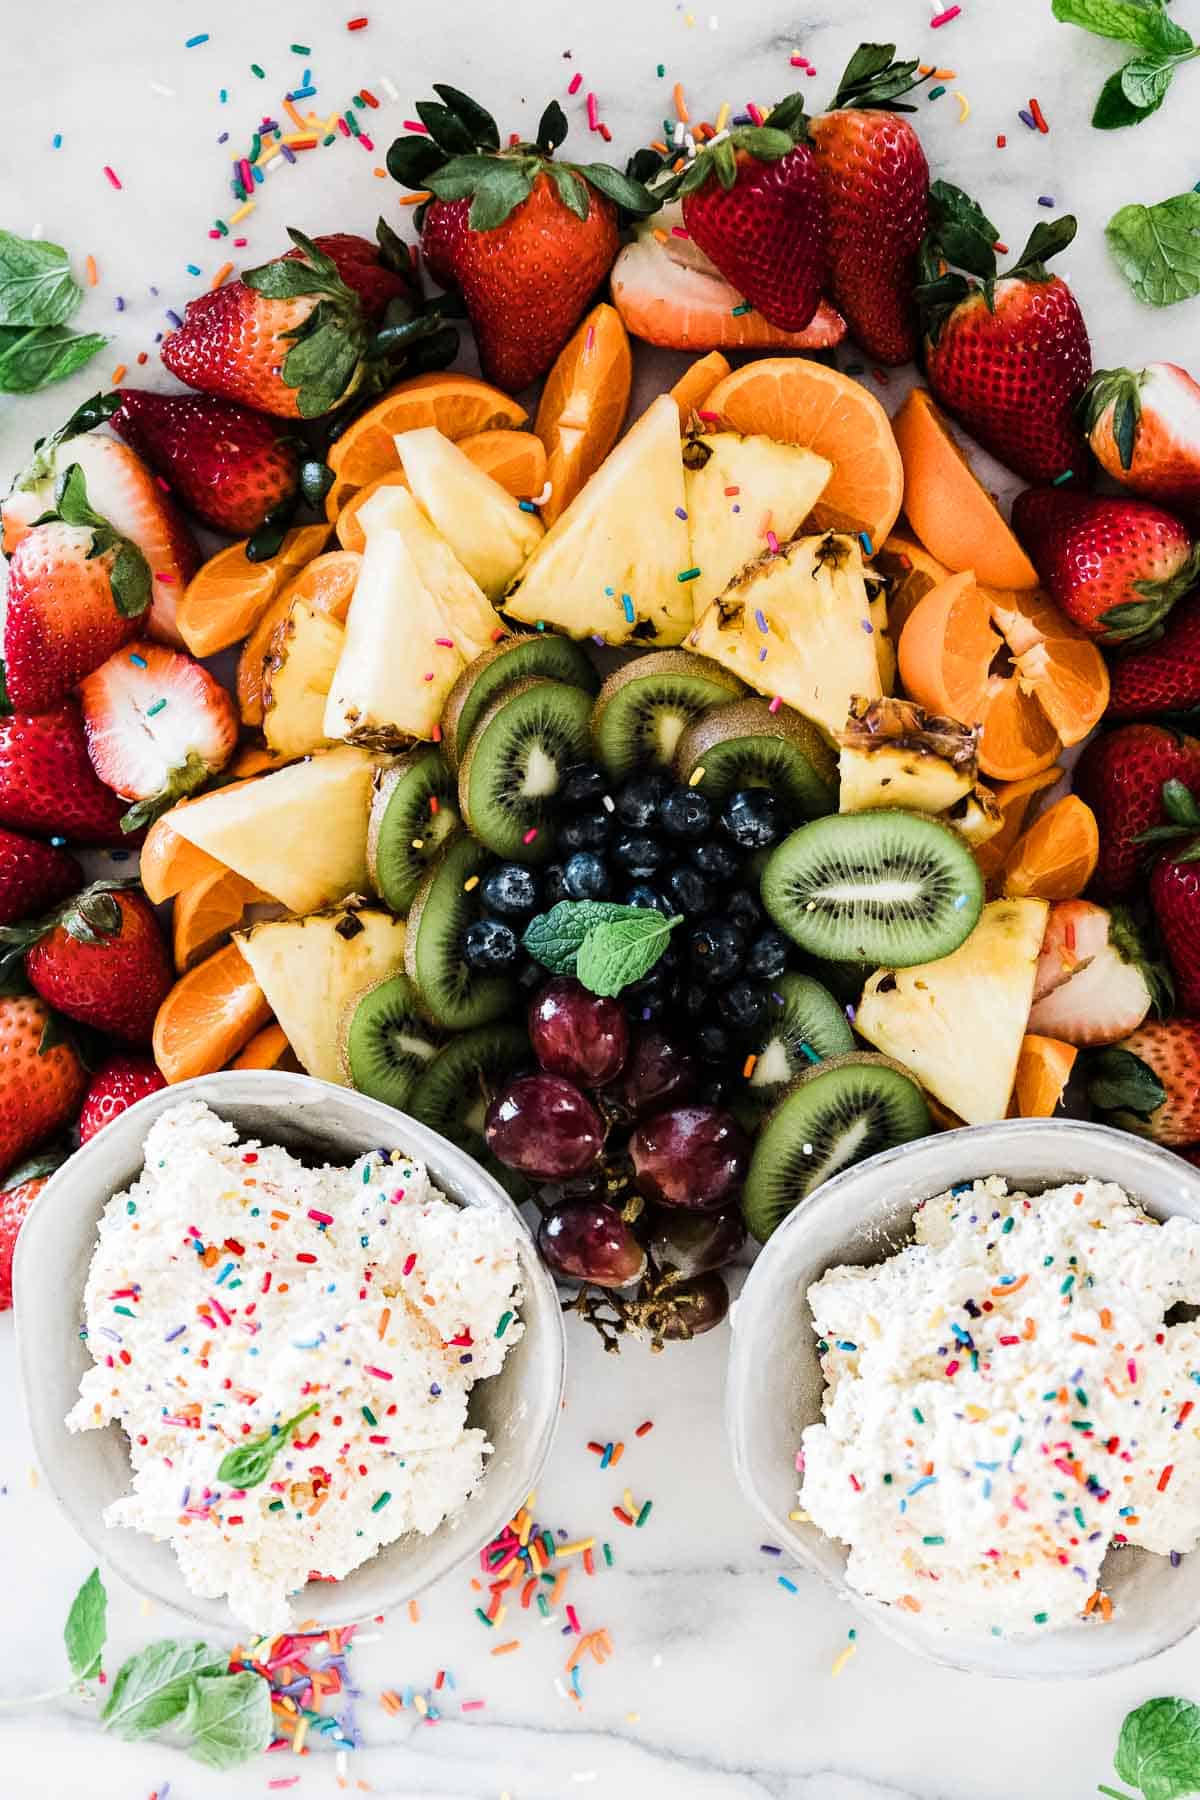 Cake batter dip in two bowls surrounded by fruit arranged into a rainbow.